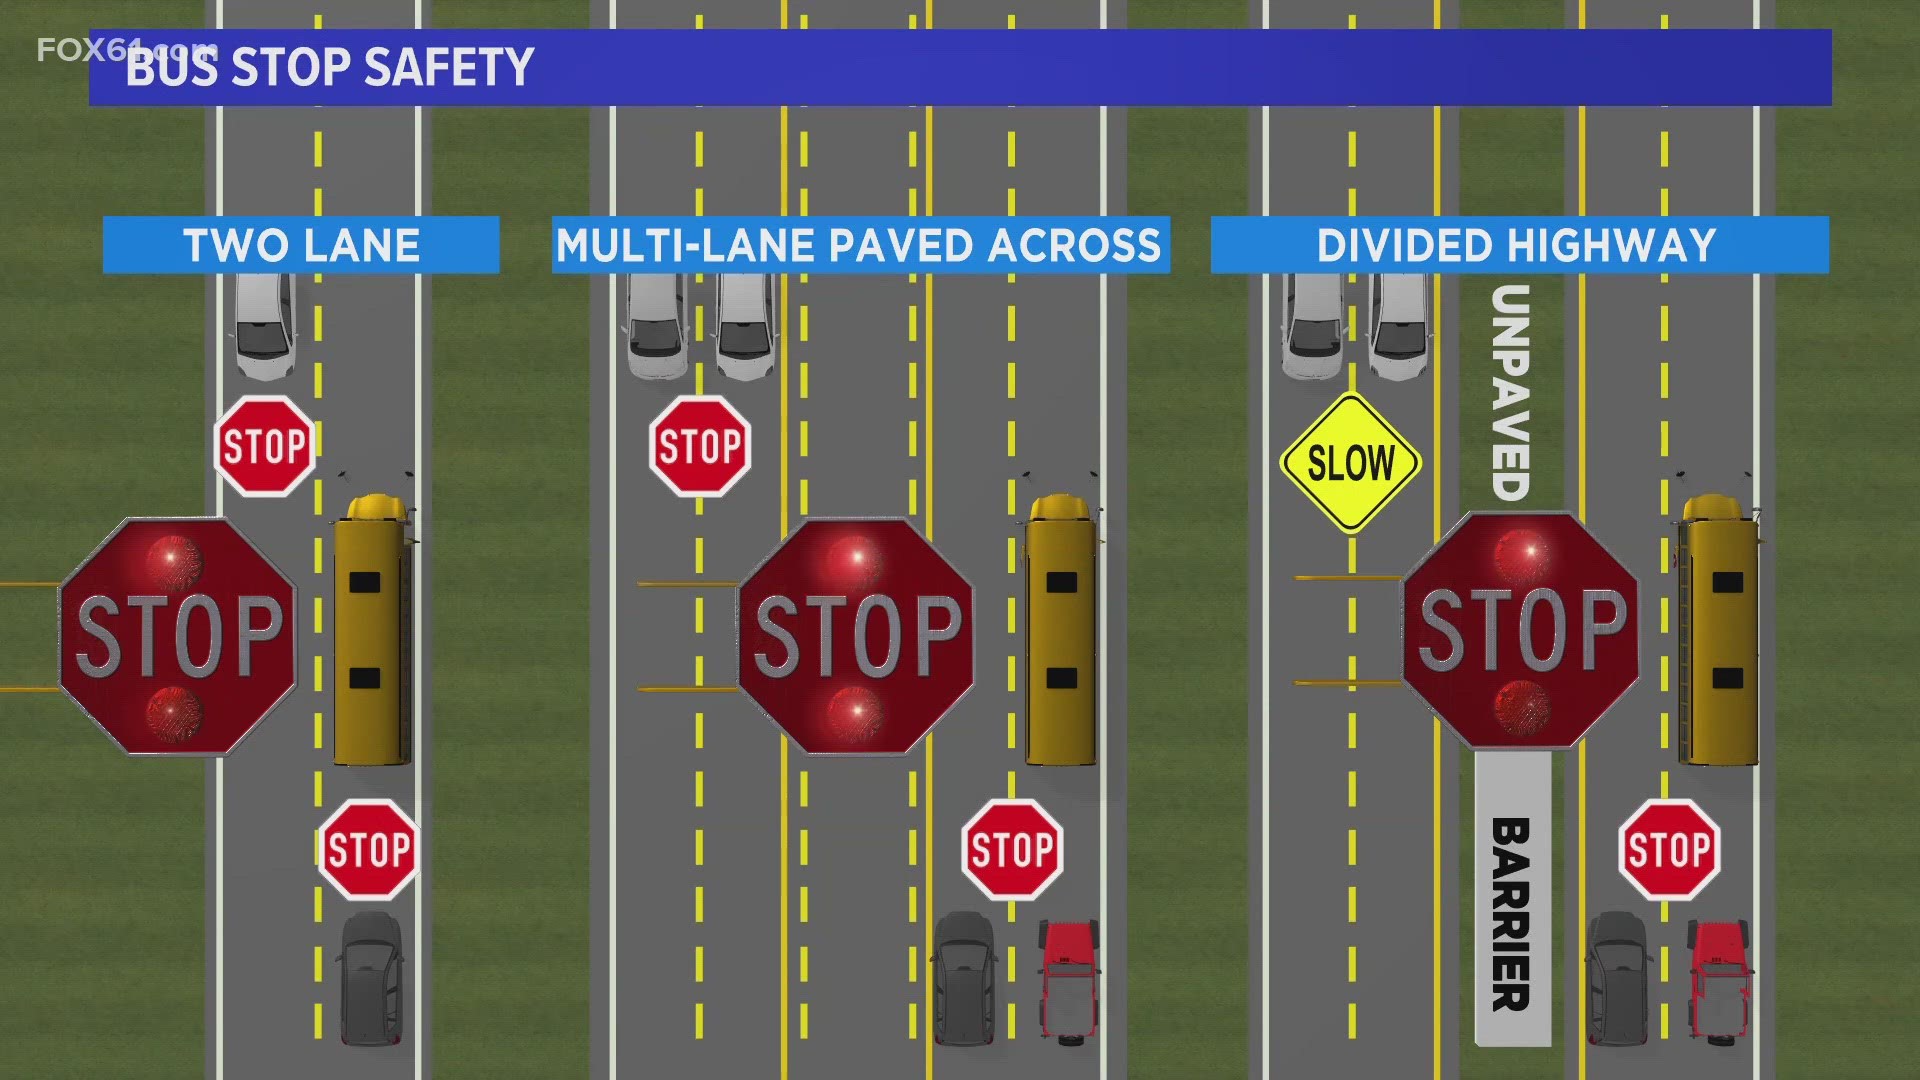 Do you know what to do when a school bus is stopped while picking up students? Here's a refresher ahead of the new school year.